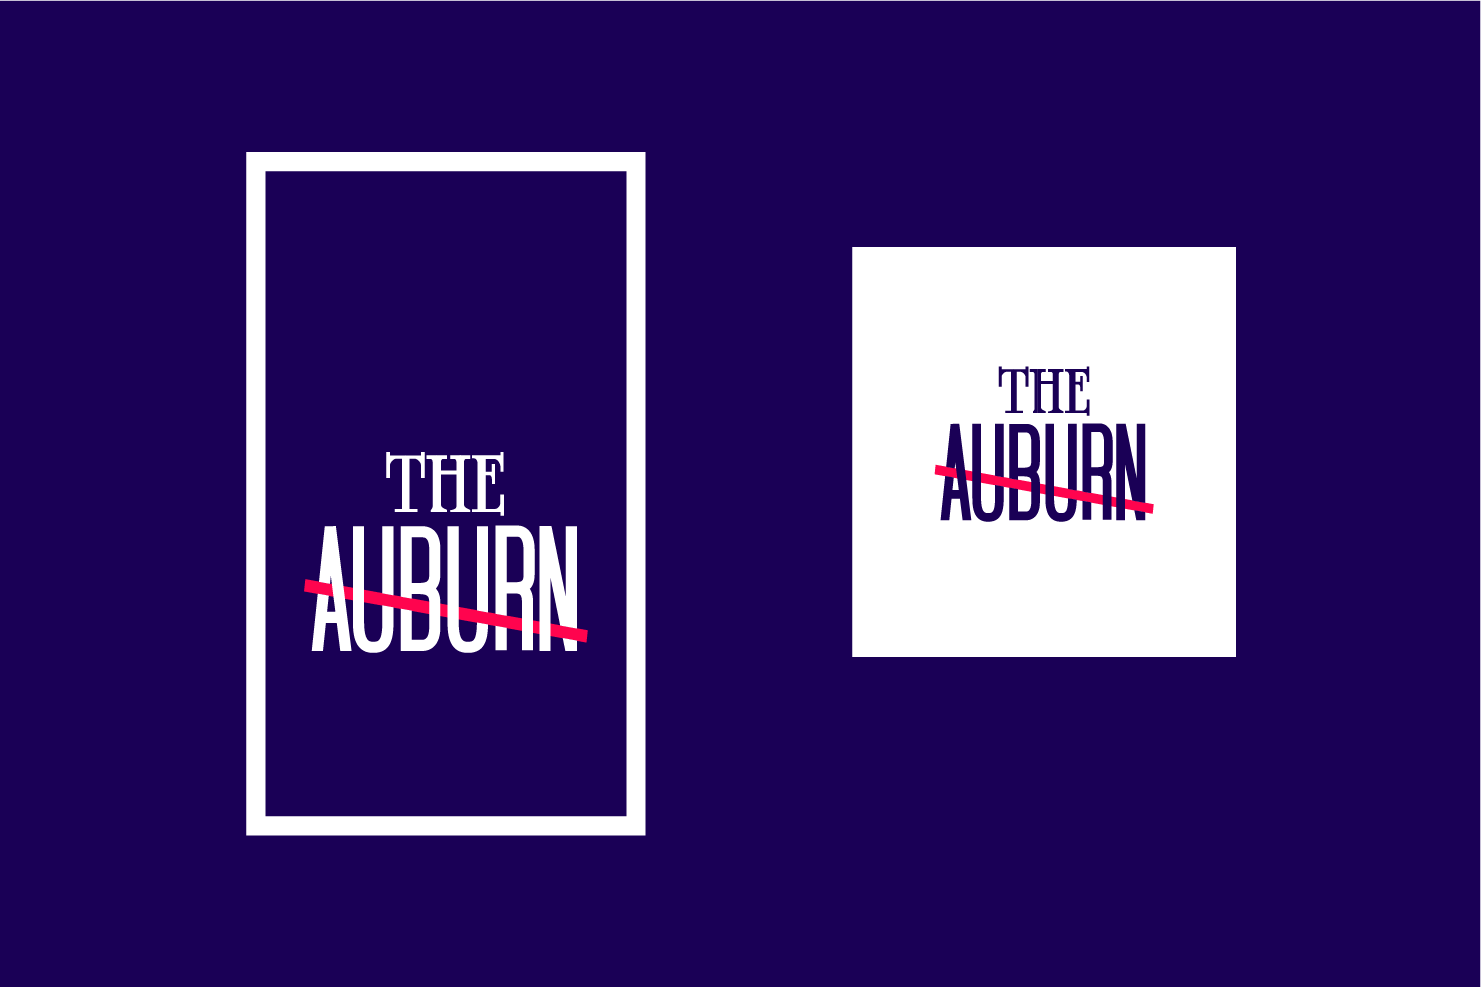 The Auburn logo square and vertical